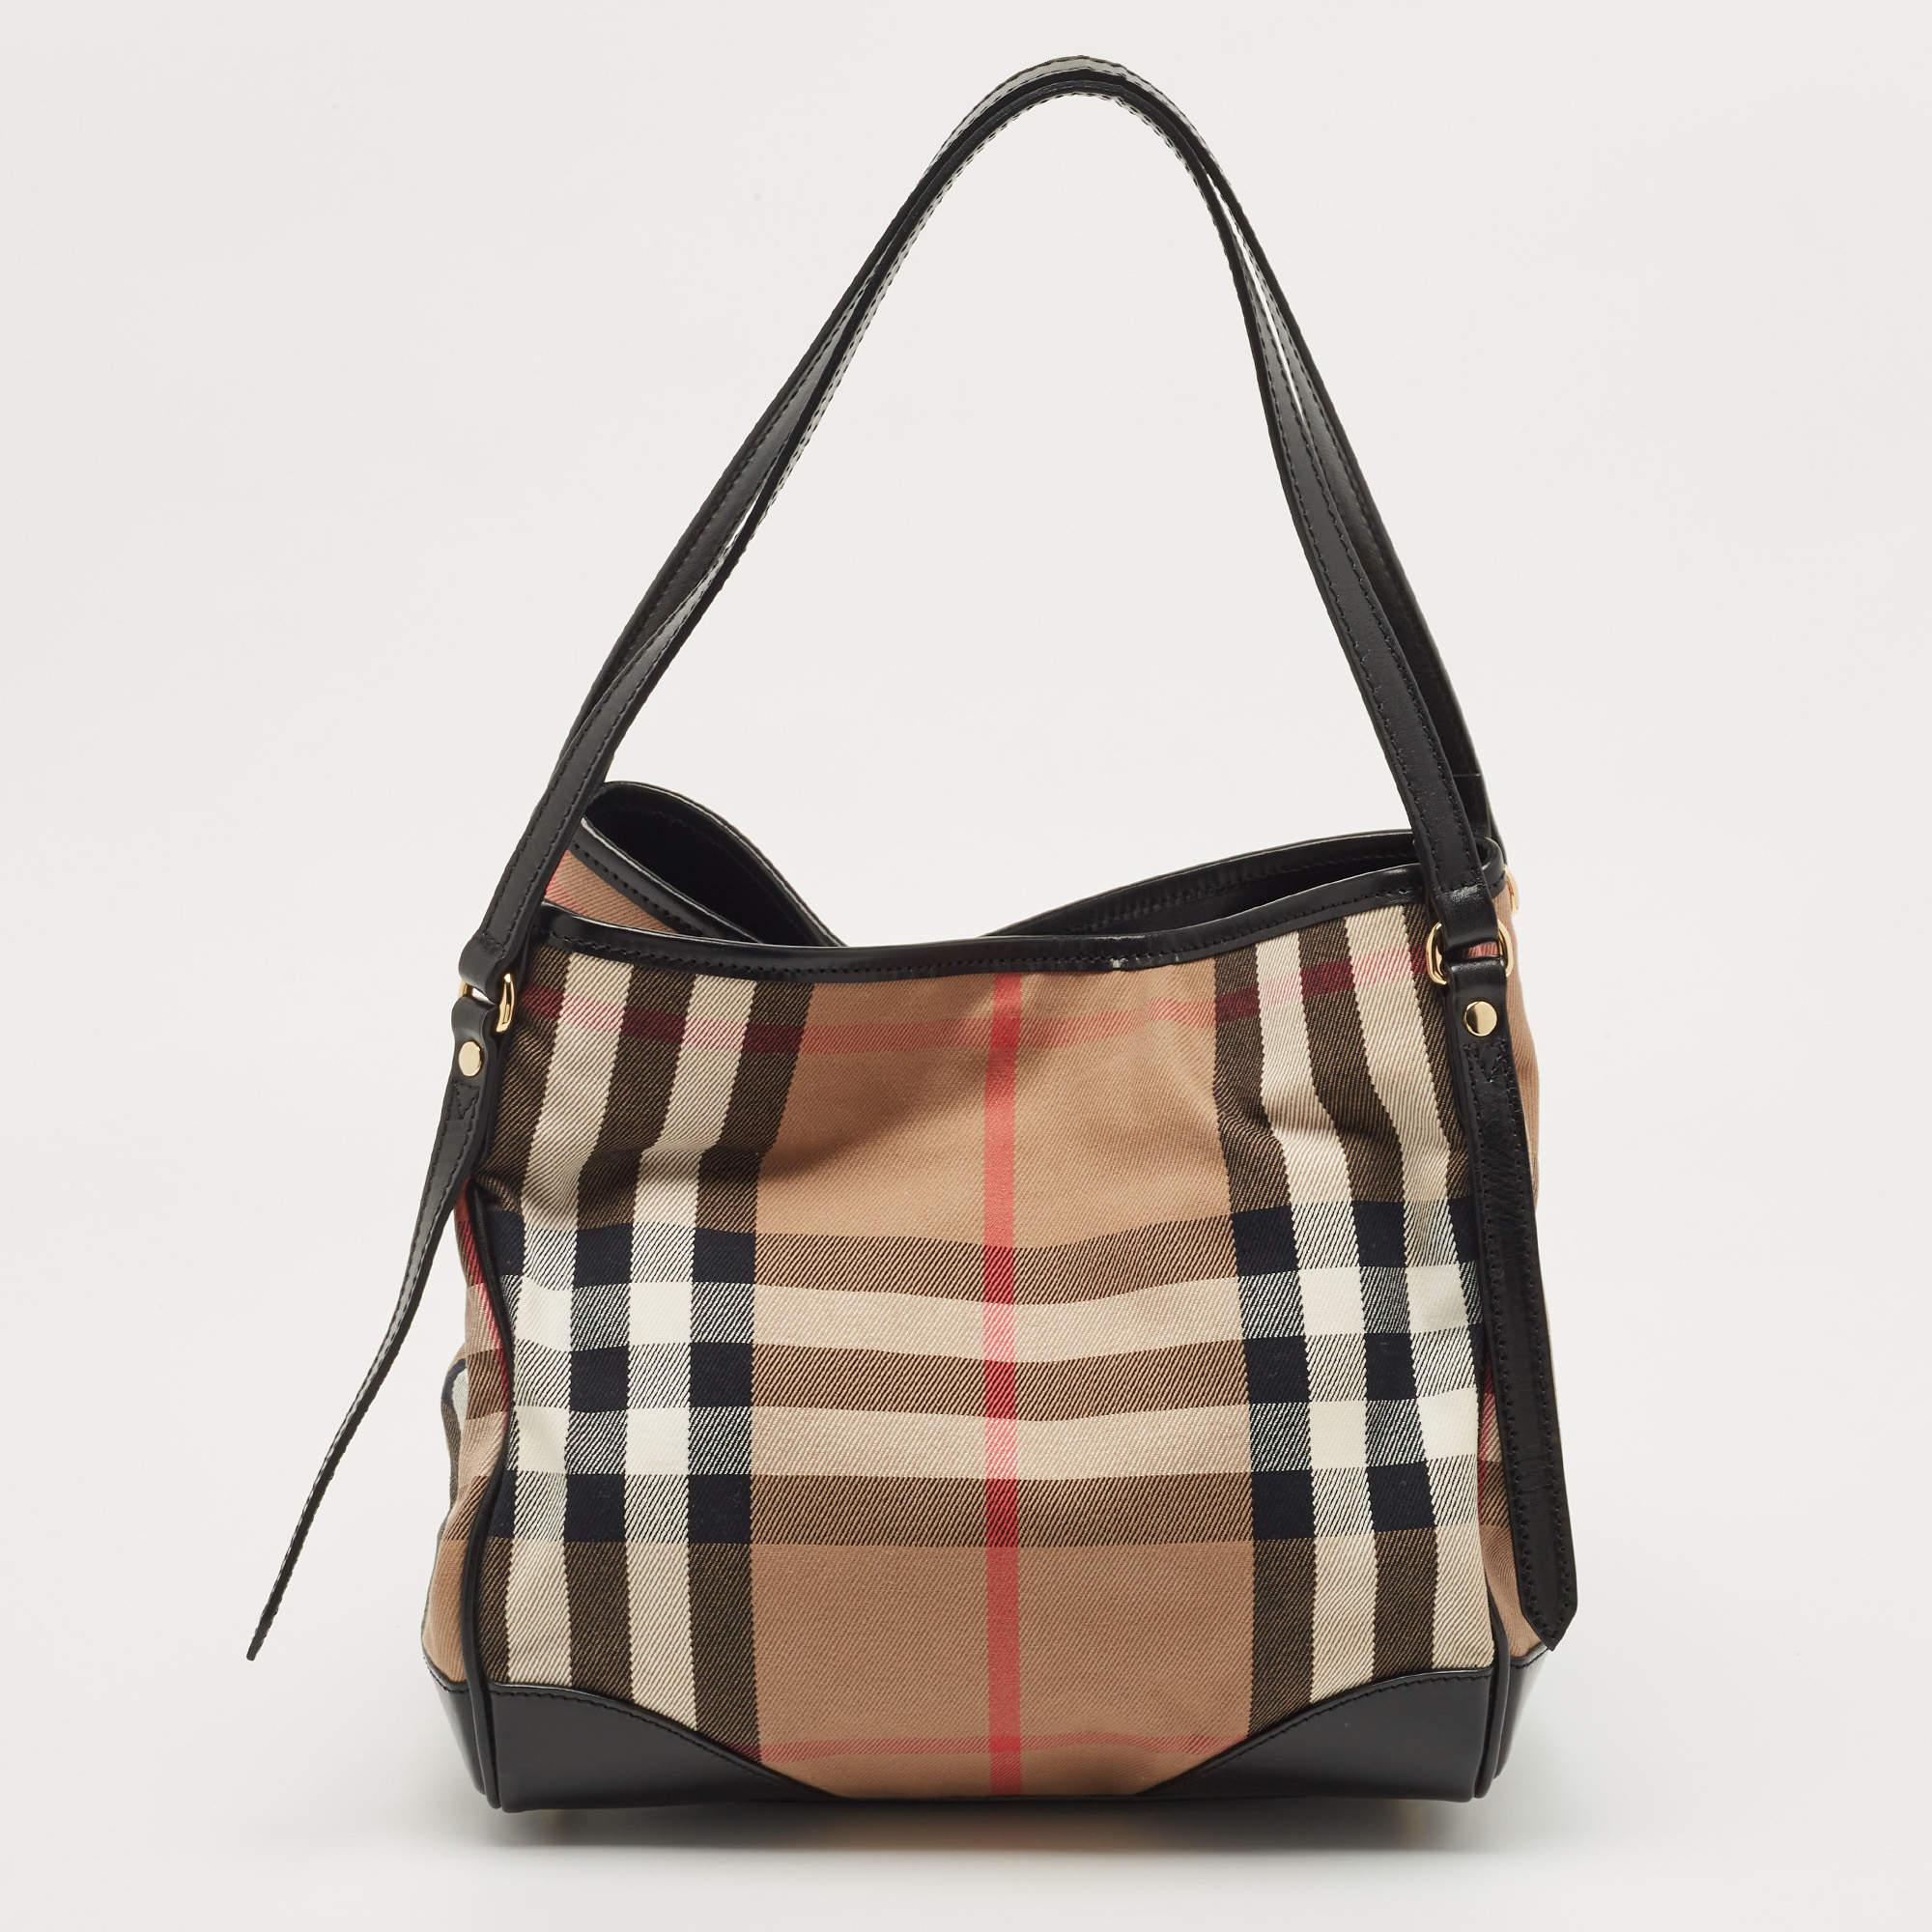 This Burberry Canterbury tote has the perfect fusion of ease and style. Created from House Check fabric and leather, it is held by dual handles at the top, and it is adorned with gold-tone accents. The fabric-lined interior of the bag is spacious